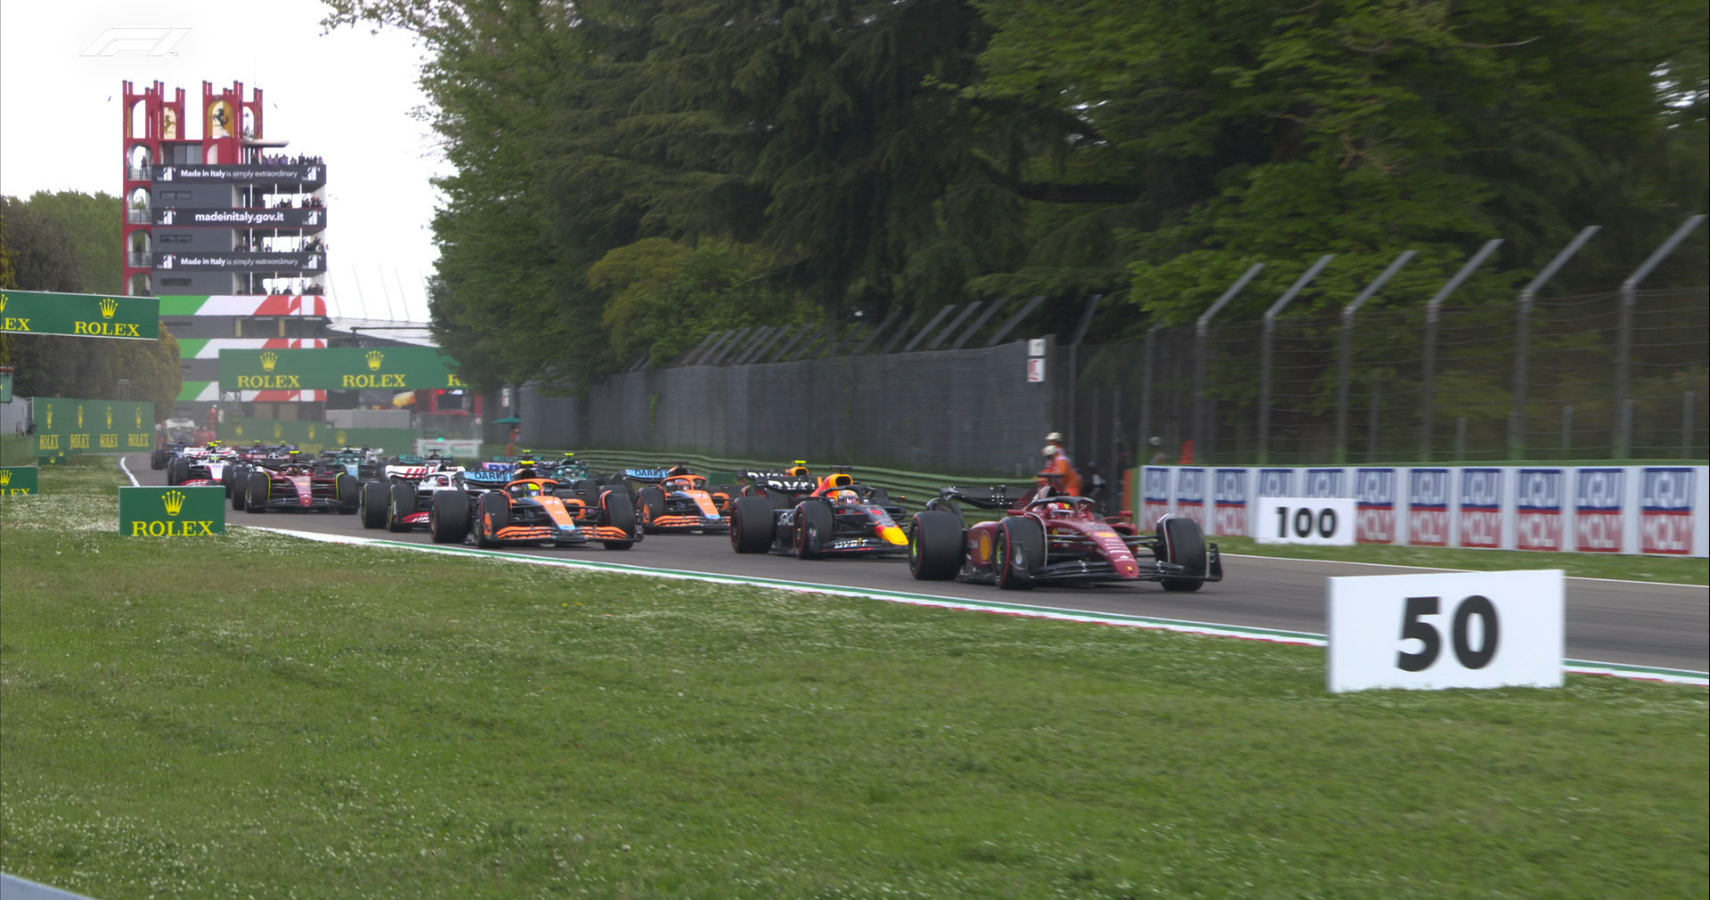 Formula 1 Sprint Race, view from distance of cars on track